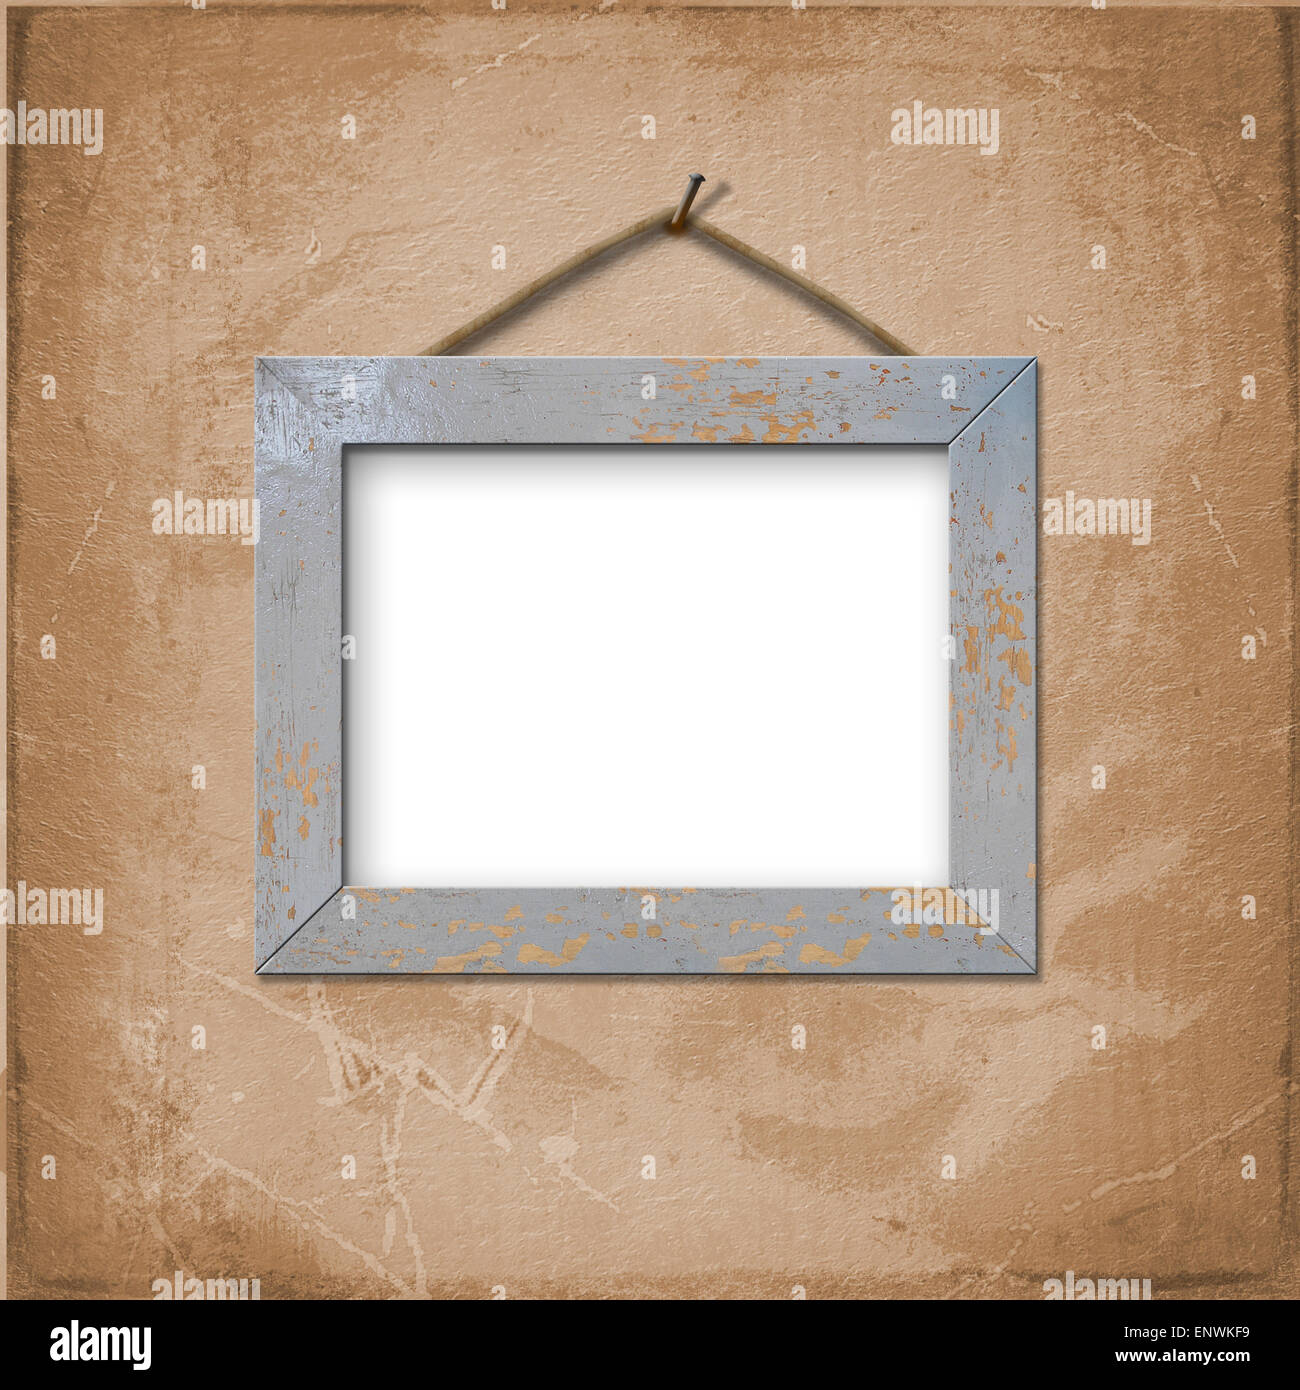 Wooden frame for picture or photo Stock Photo